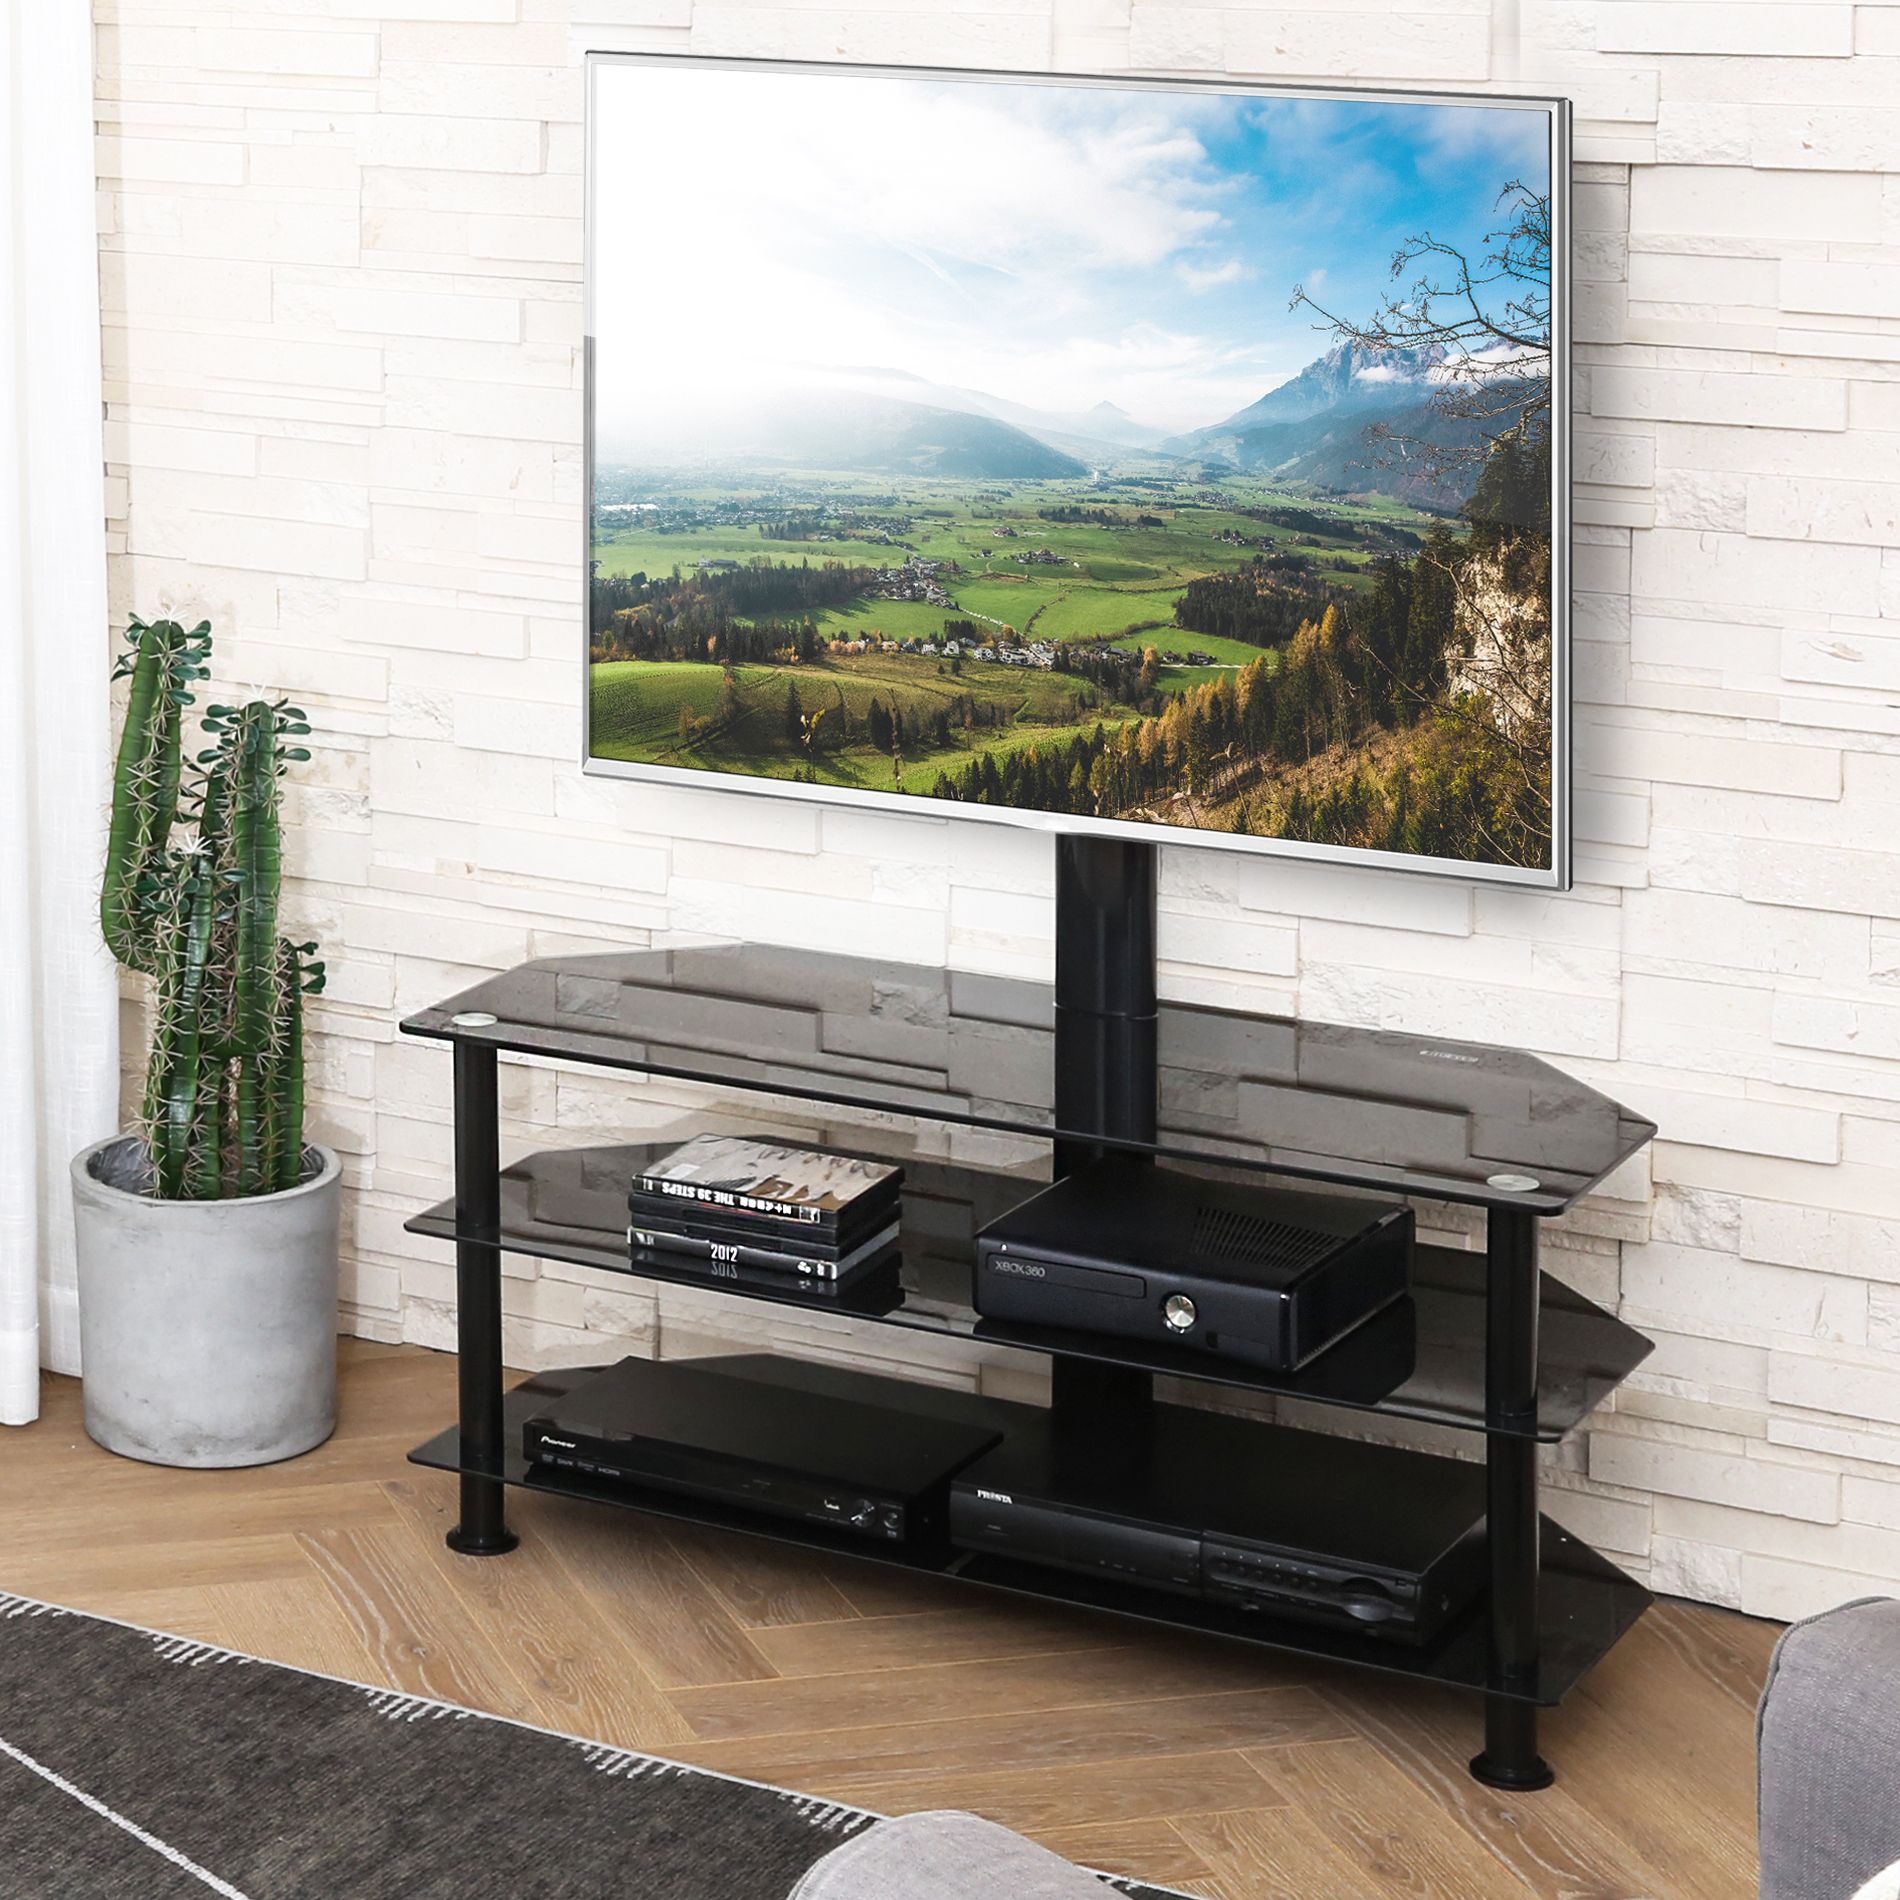 Fenge Swivel Floor Tv Stand With Mount, Height Adjustable Pertaining To Swivel Tv Stands With Mount (View 7 of 15)